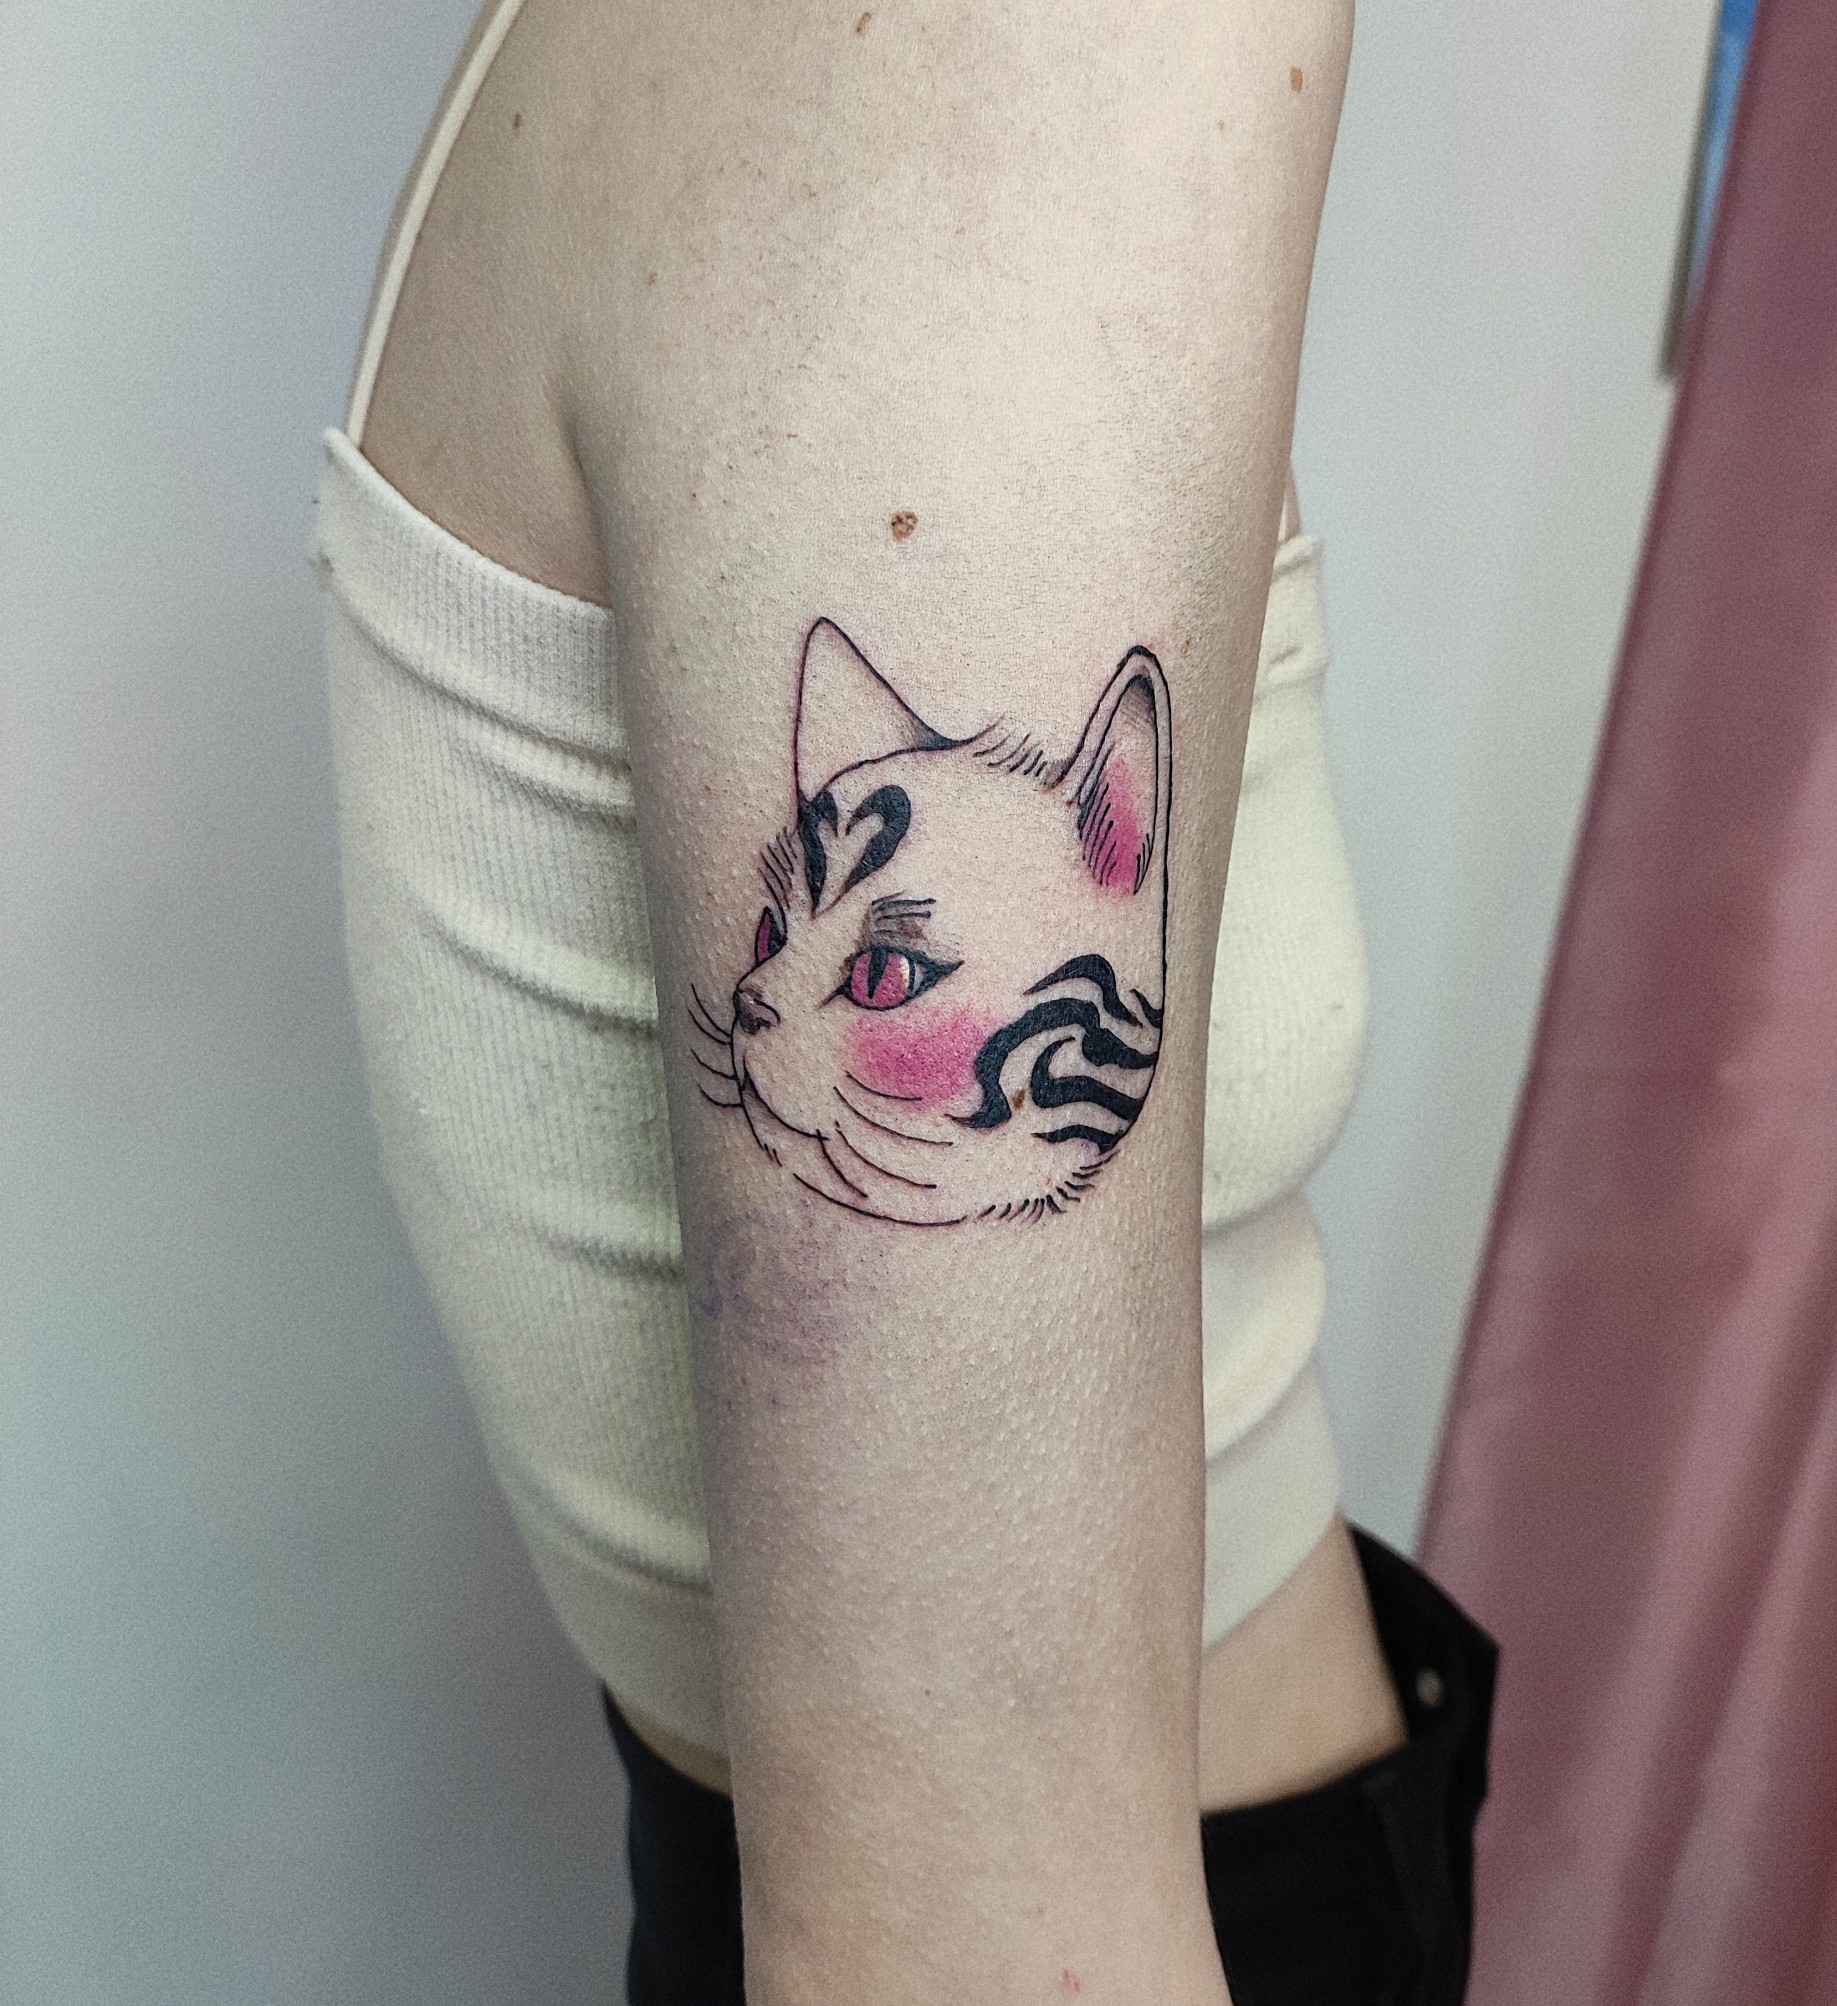 Skin City Tattoos - Cat face tattoo by Marcelo. | Facebook